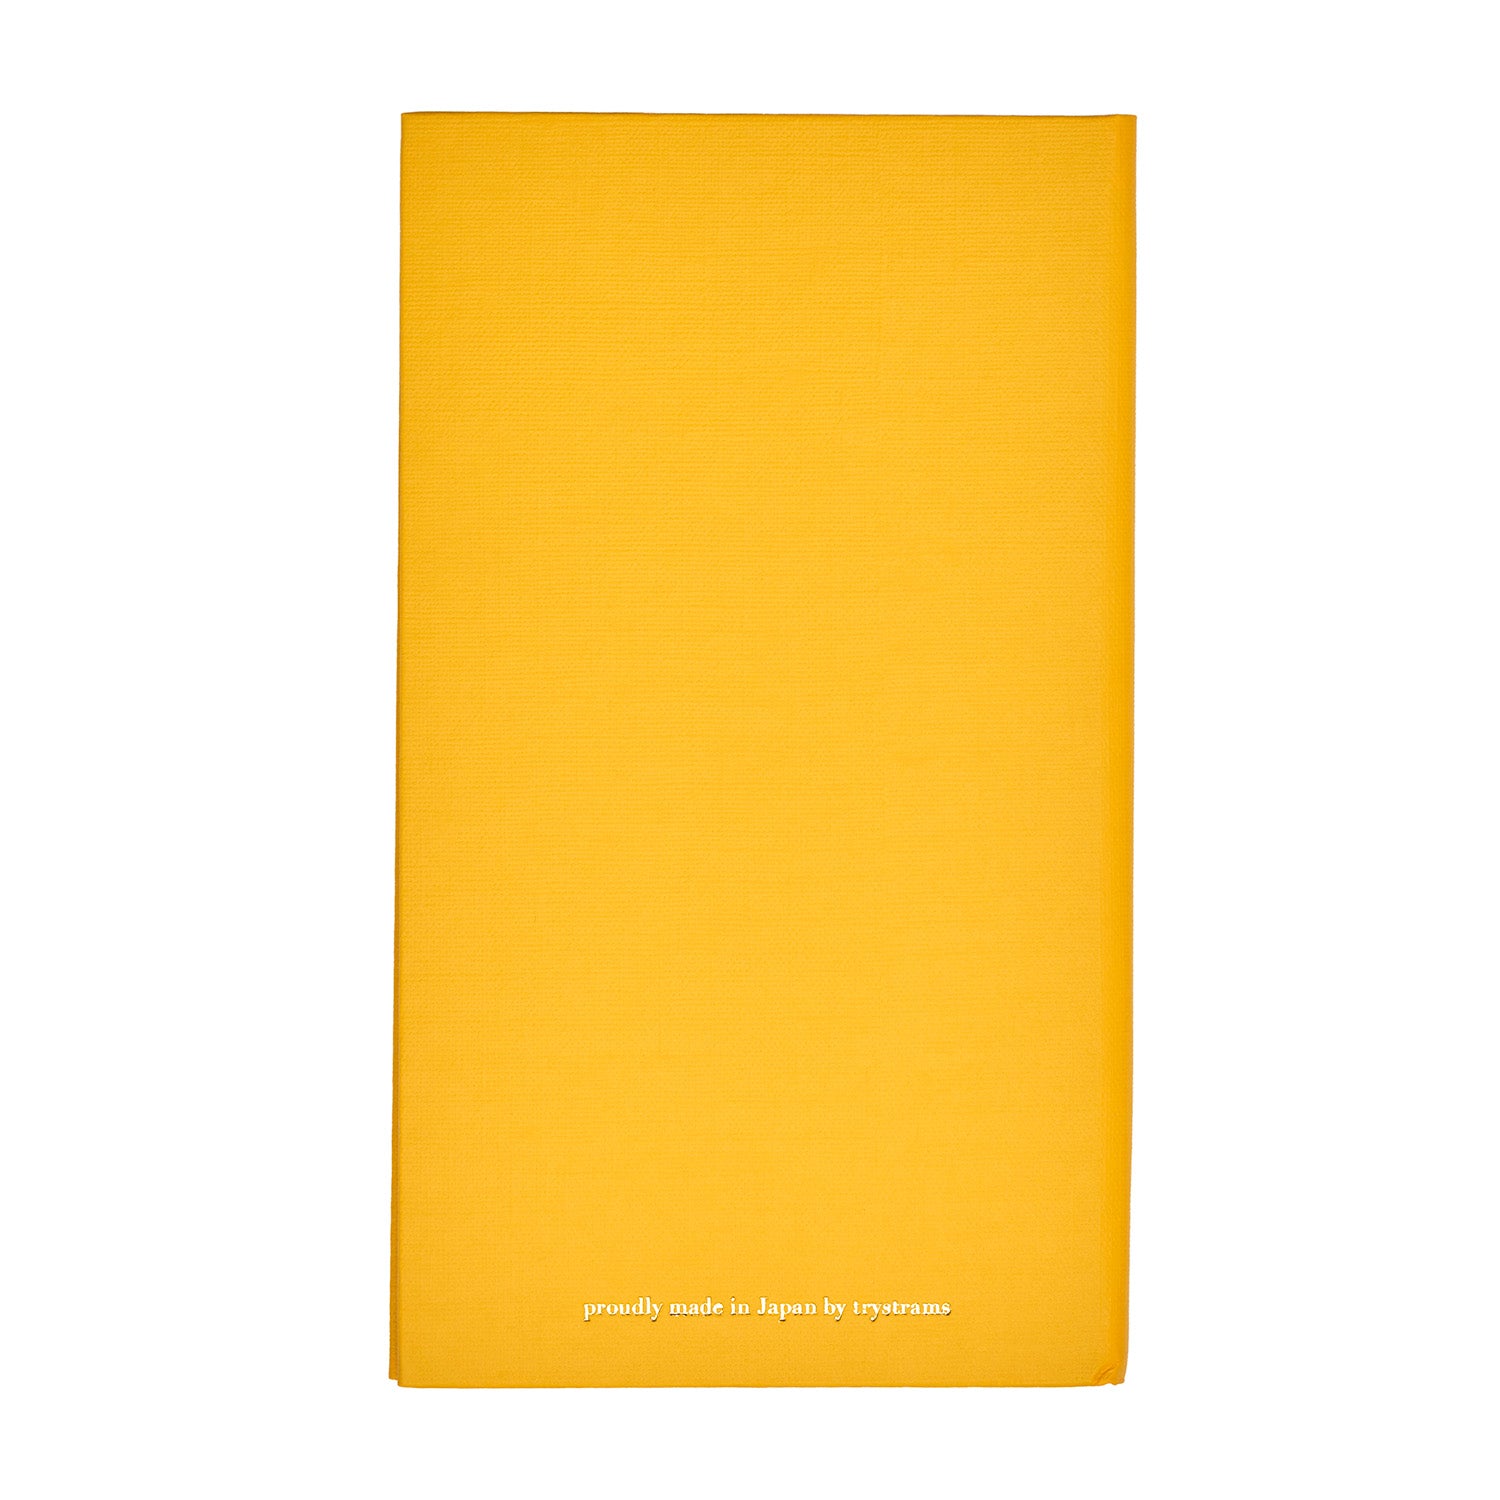 Kokuyo Field Sketch Book Notebook - 3 mm Grid - Yellow - Trystrams back cover